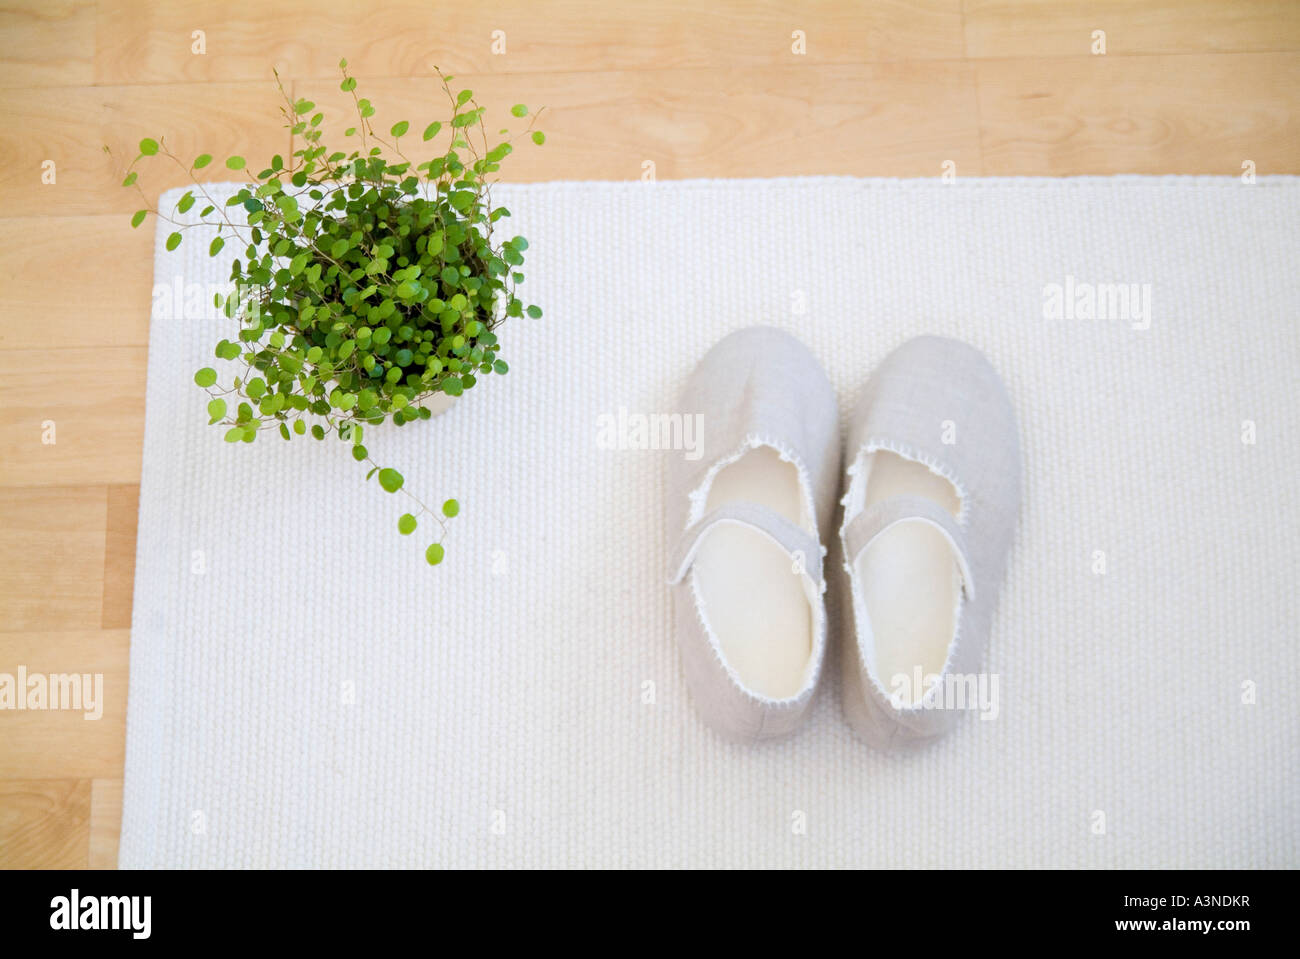 Room shoes on mat Stock Photo